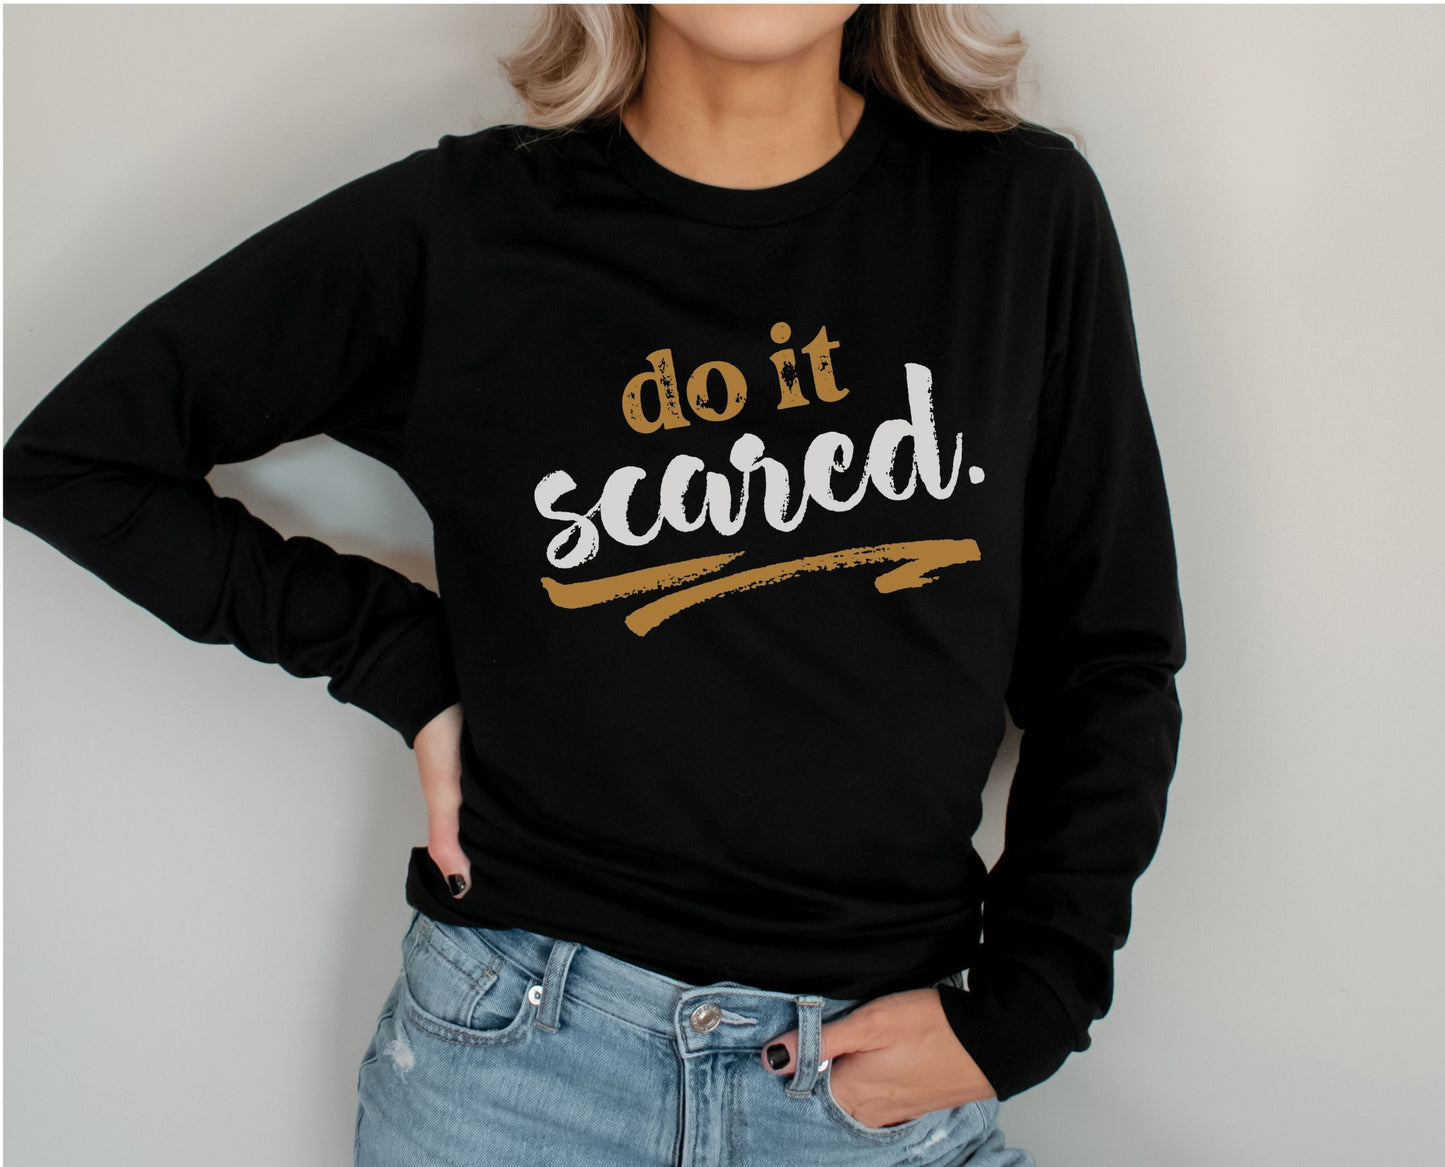 Do It Scared faith over fear 2 Timothy 1:7 do not fear bible verse Christian aesthetic design printed in white and gold on soft black unisex long sleeve tee shirt for women and men